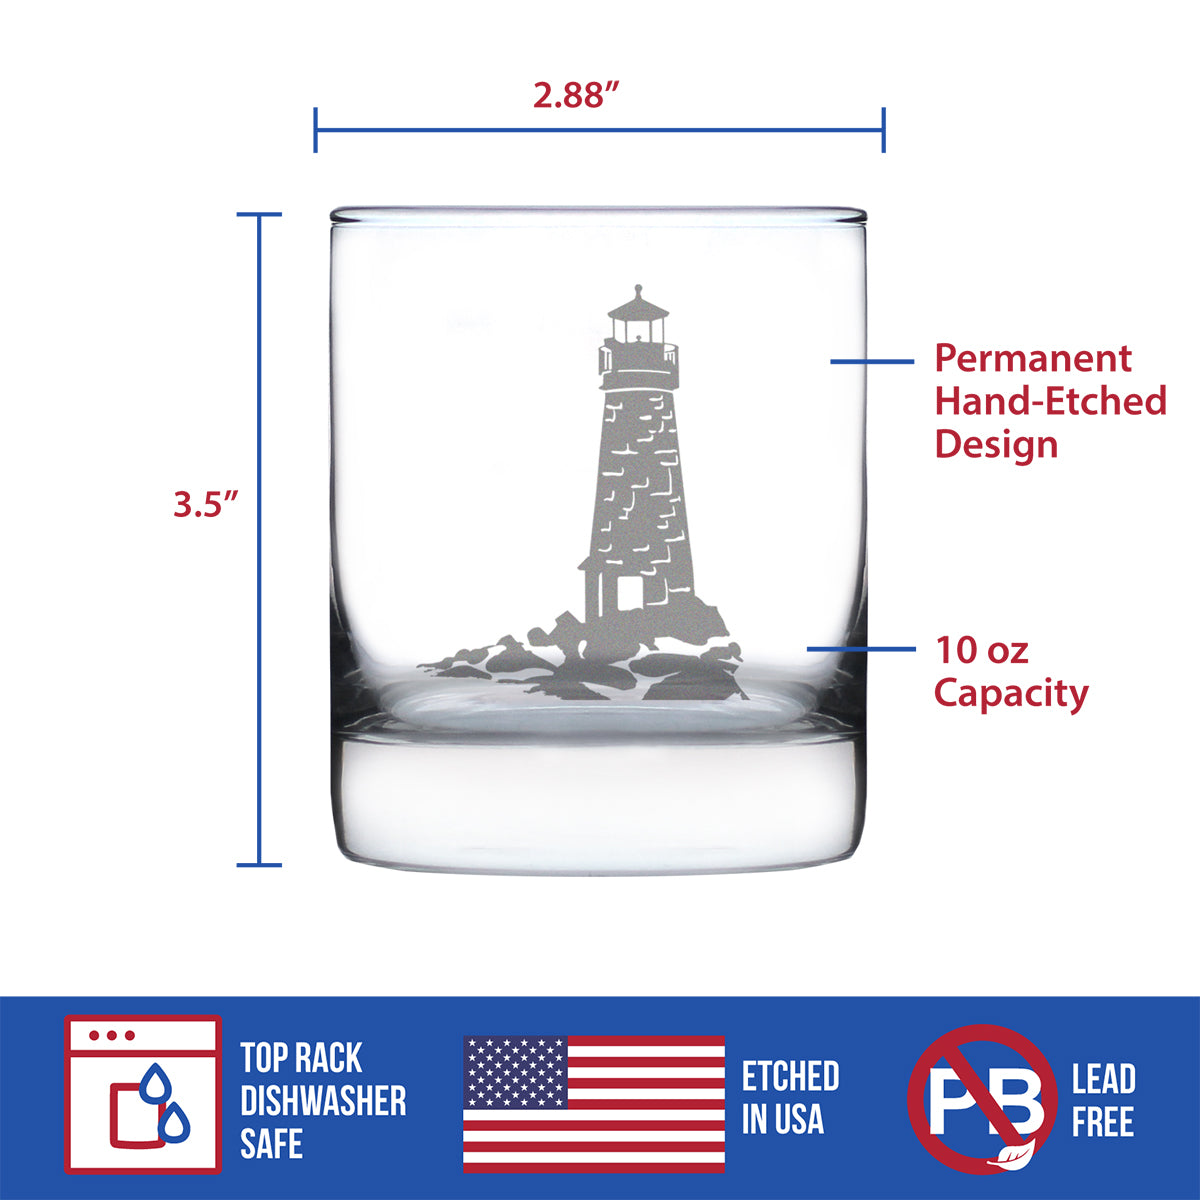 Lighthouse Whiskey Rocks Glass - Nautical Themed Decor and Gifts for Beach Lovers - 10.25 Oz Glasses